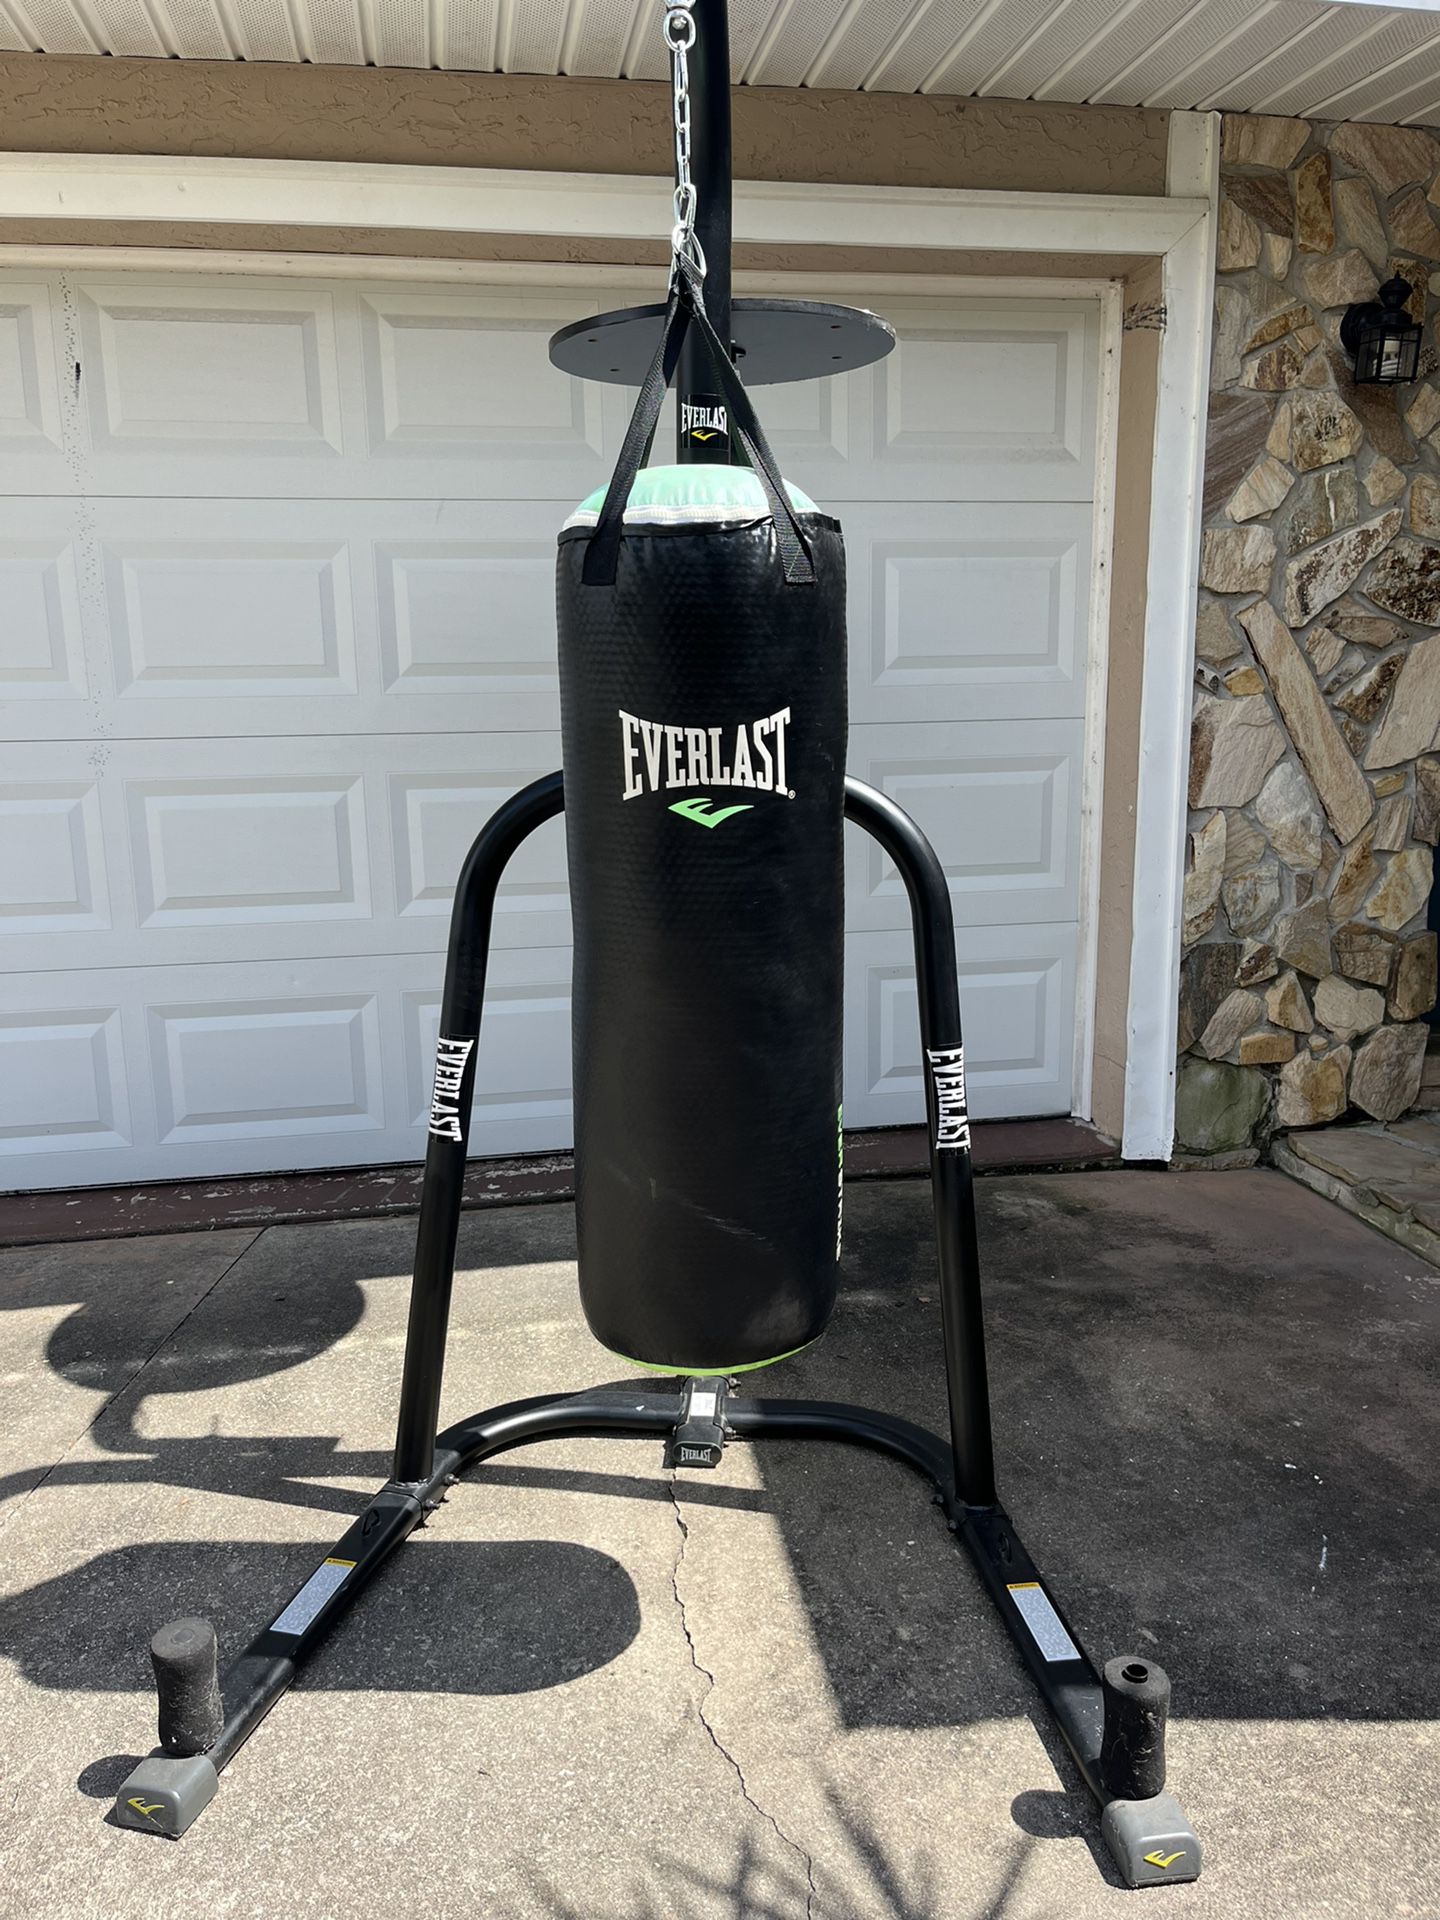 Everlast punching bag and speed bag 